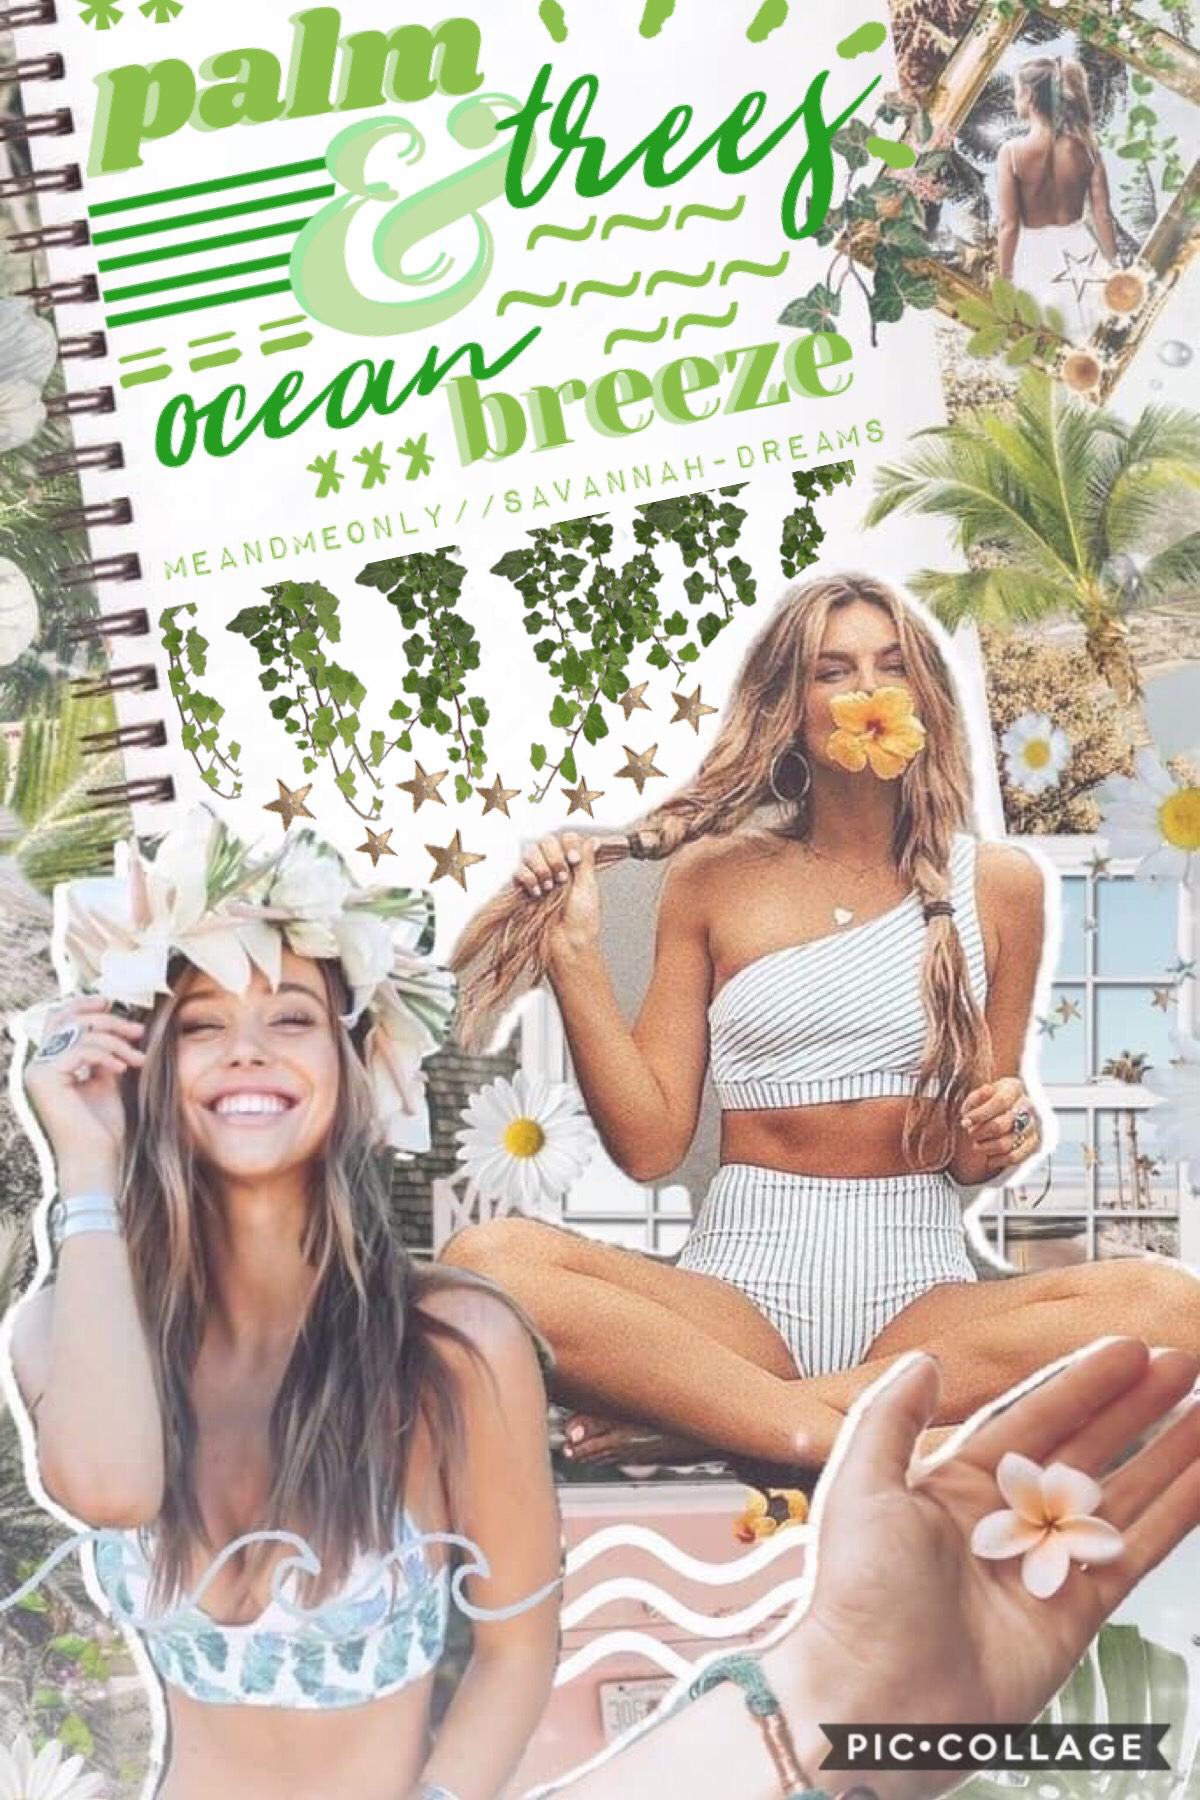 collab with the absolutely amazing... enya! (@meandmeonly) ☁️ do i even need to say how incredible she is?? she's been my idol for my entire time on pc and i'm so glad to be able to be her friend 💗 so go check out her acc!!    